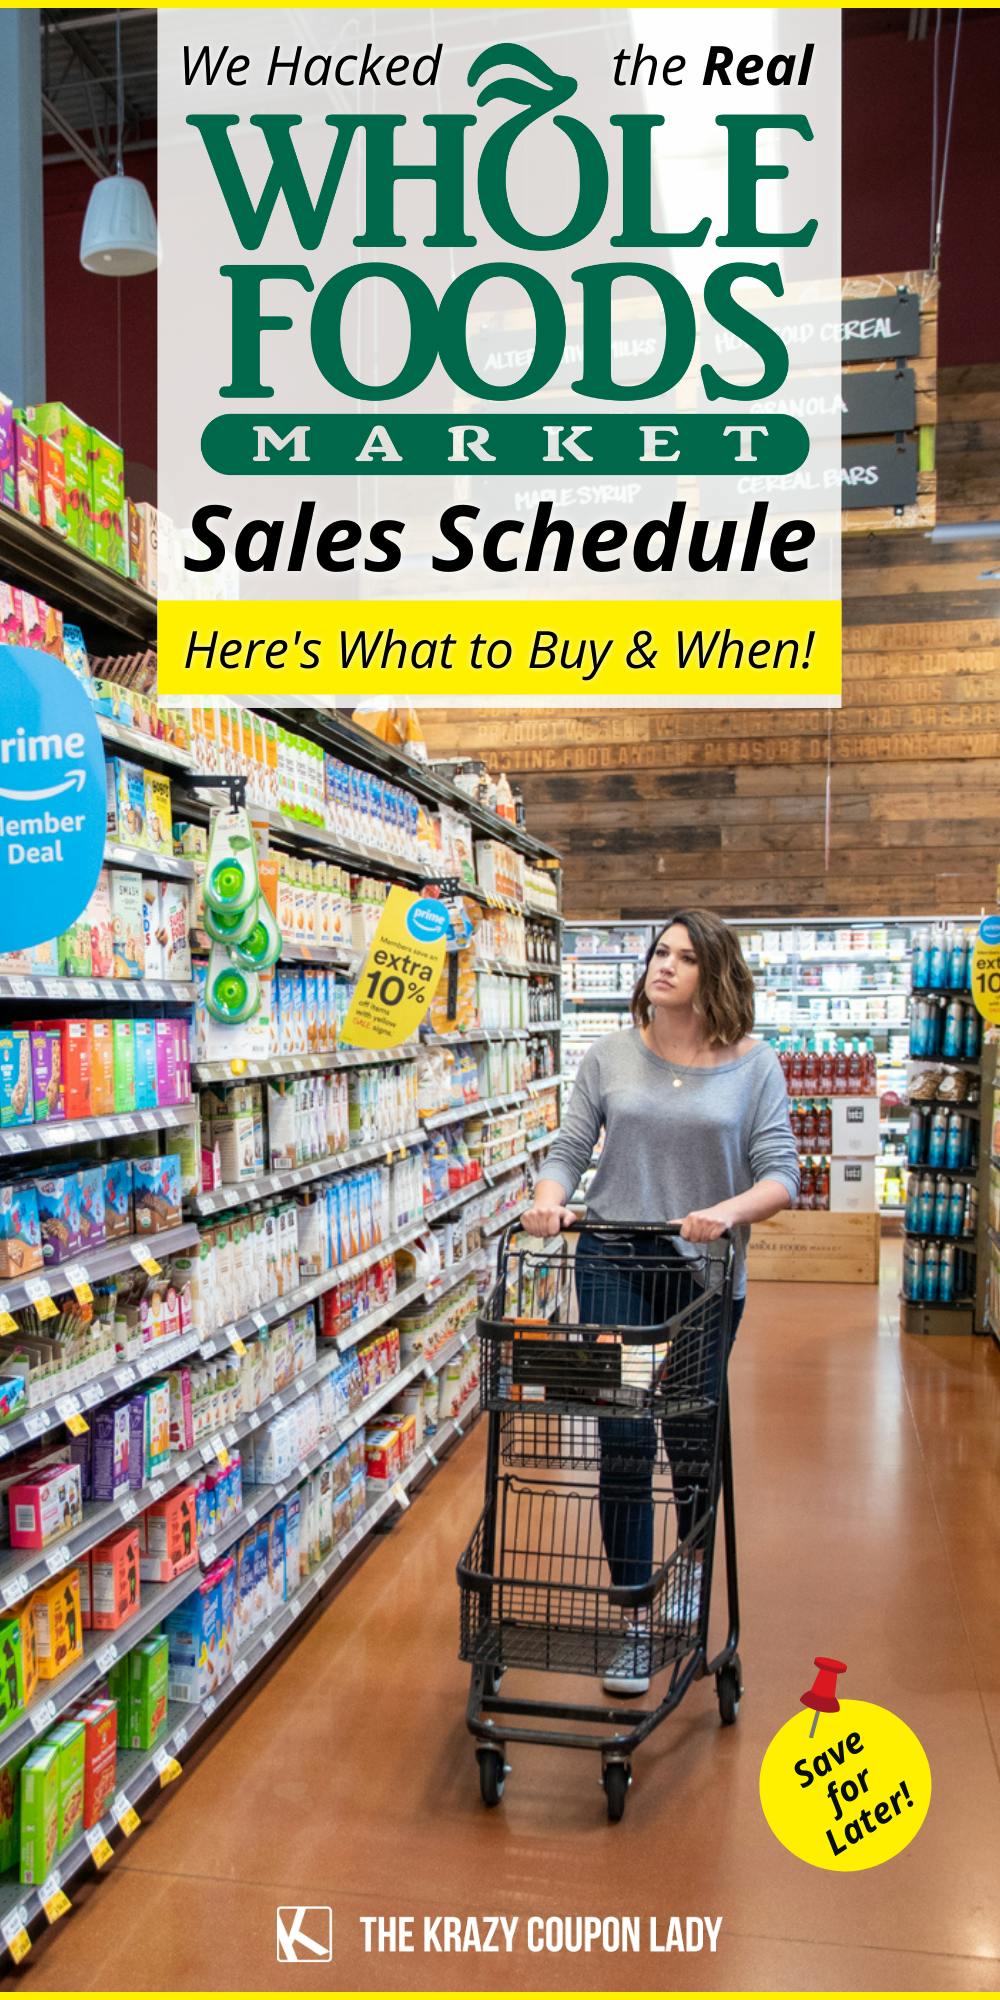 With This Whole Foods Sale Schedule, It's No More Whole Paycheck!